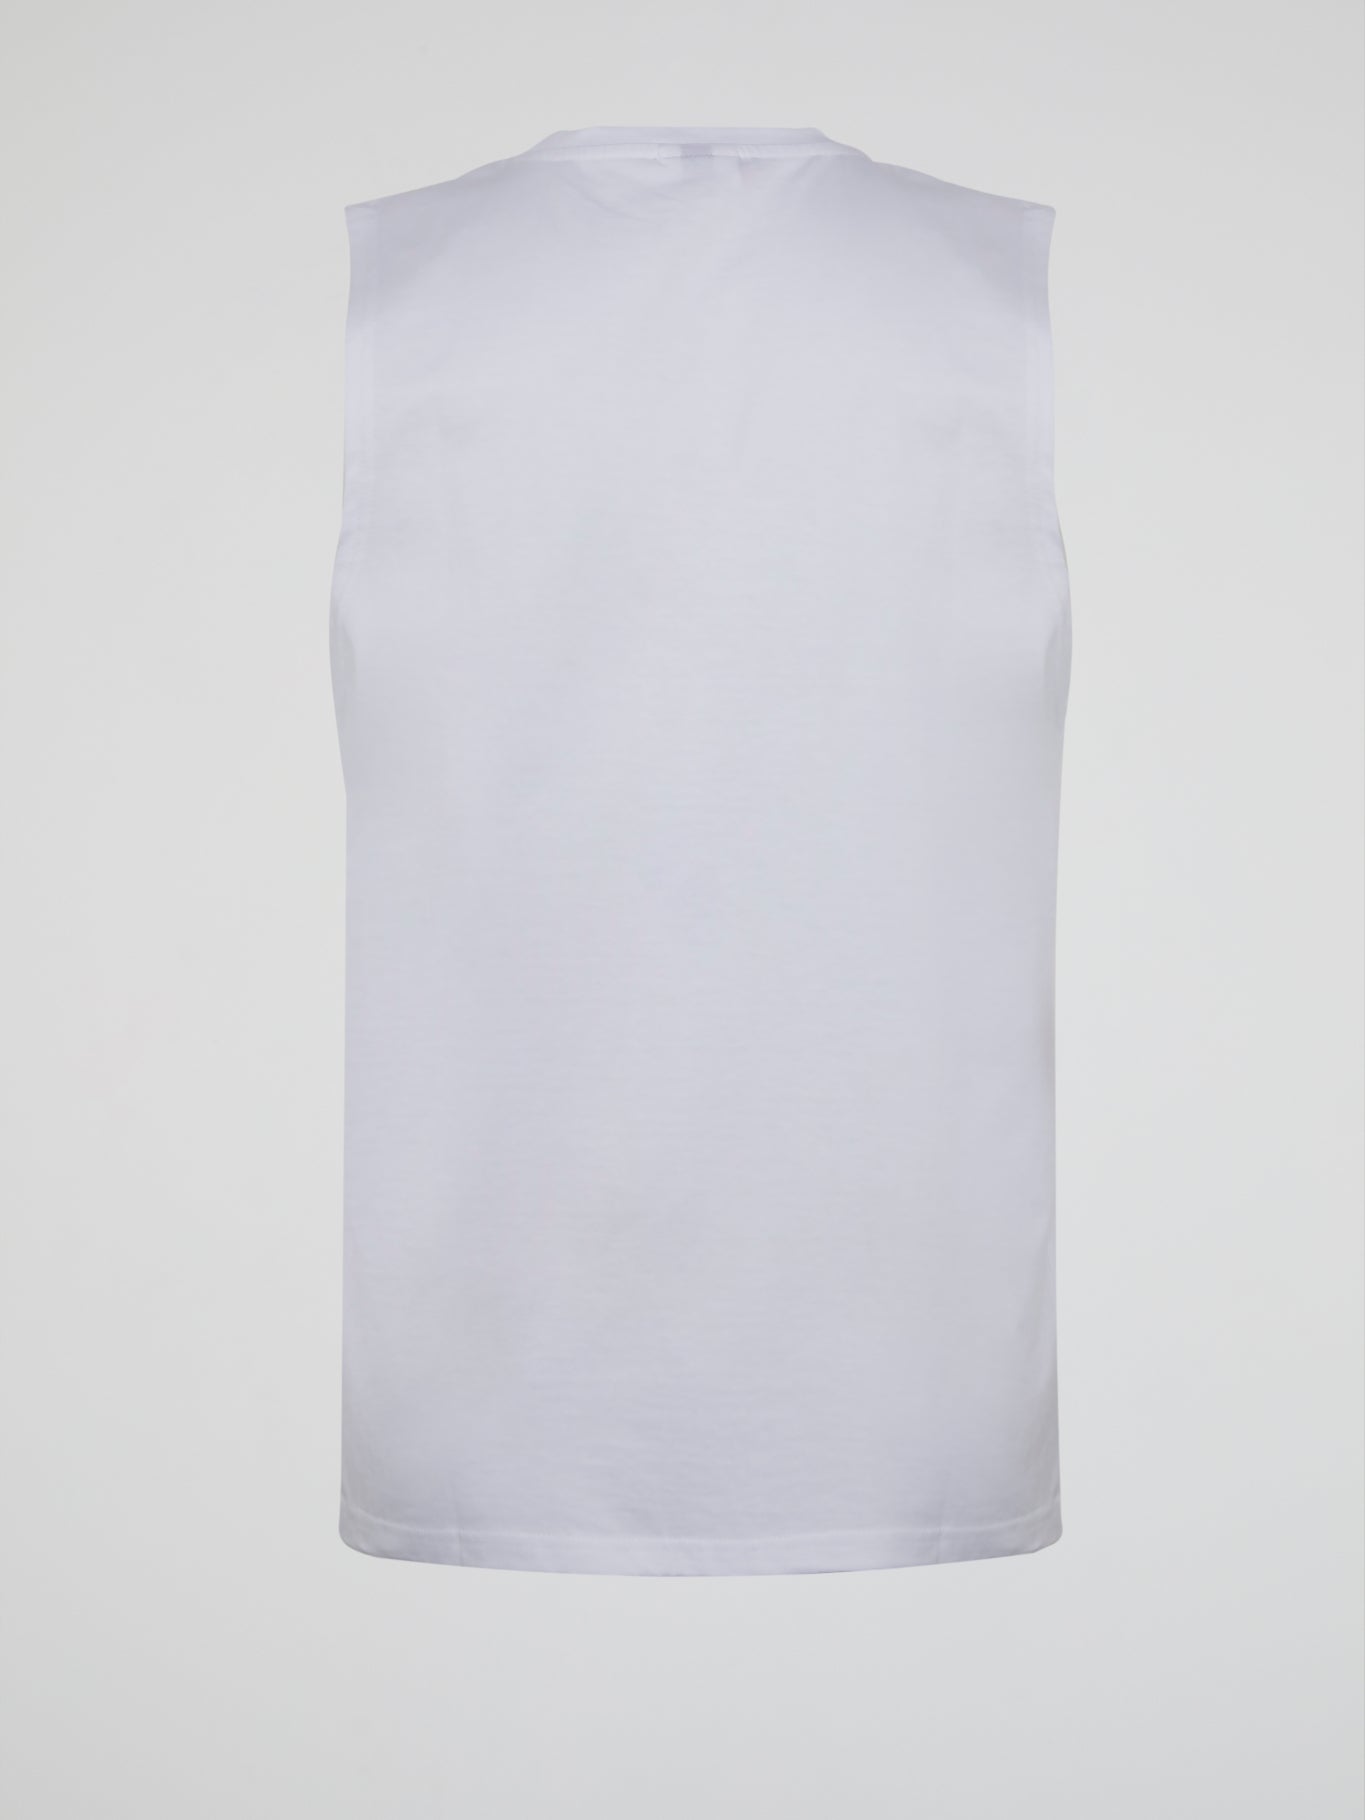 Andare White Cut Off Shirt